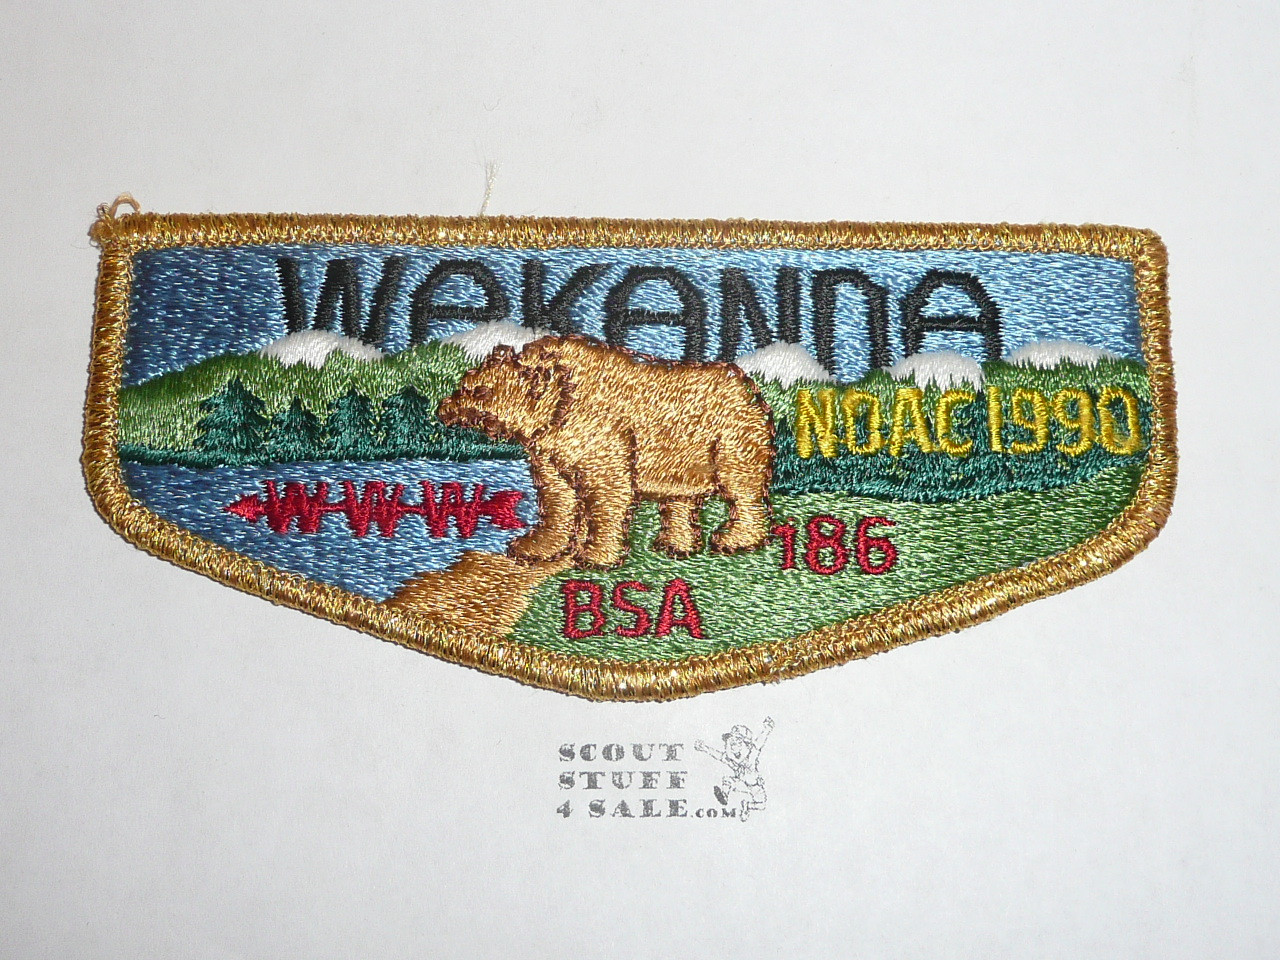 Order of the Arrow Lodge #186 Wakanda s14 1990 NOAC Flap Patch - Scout